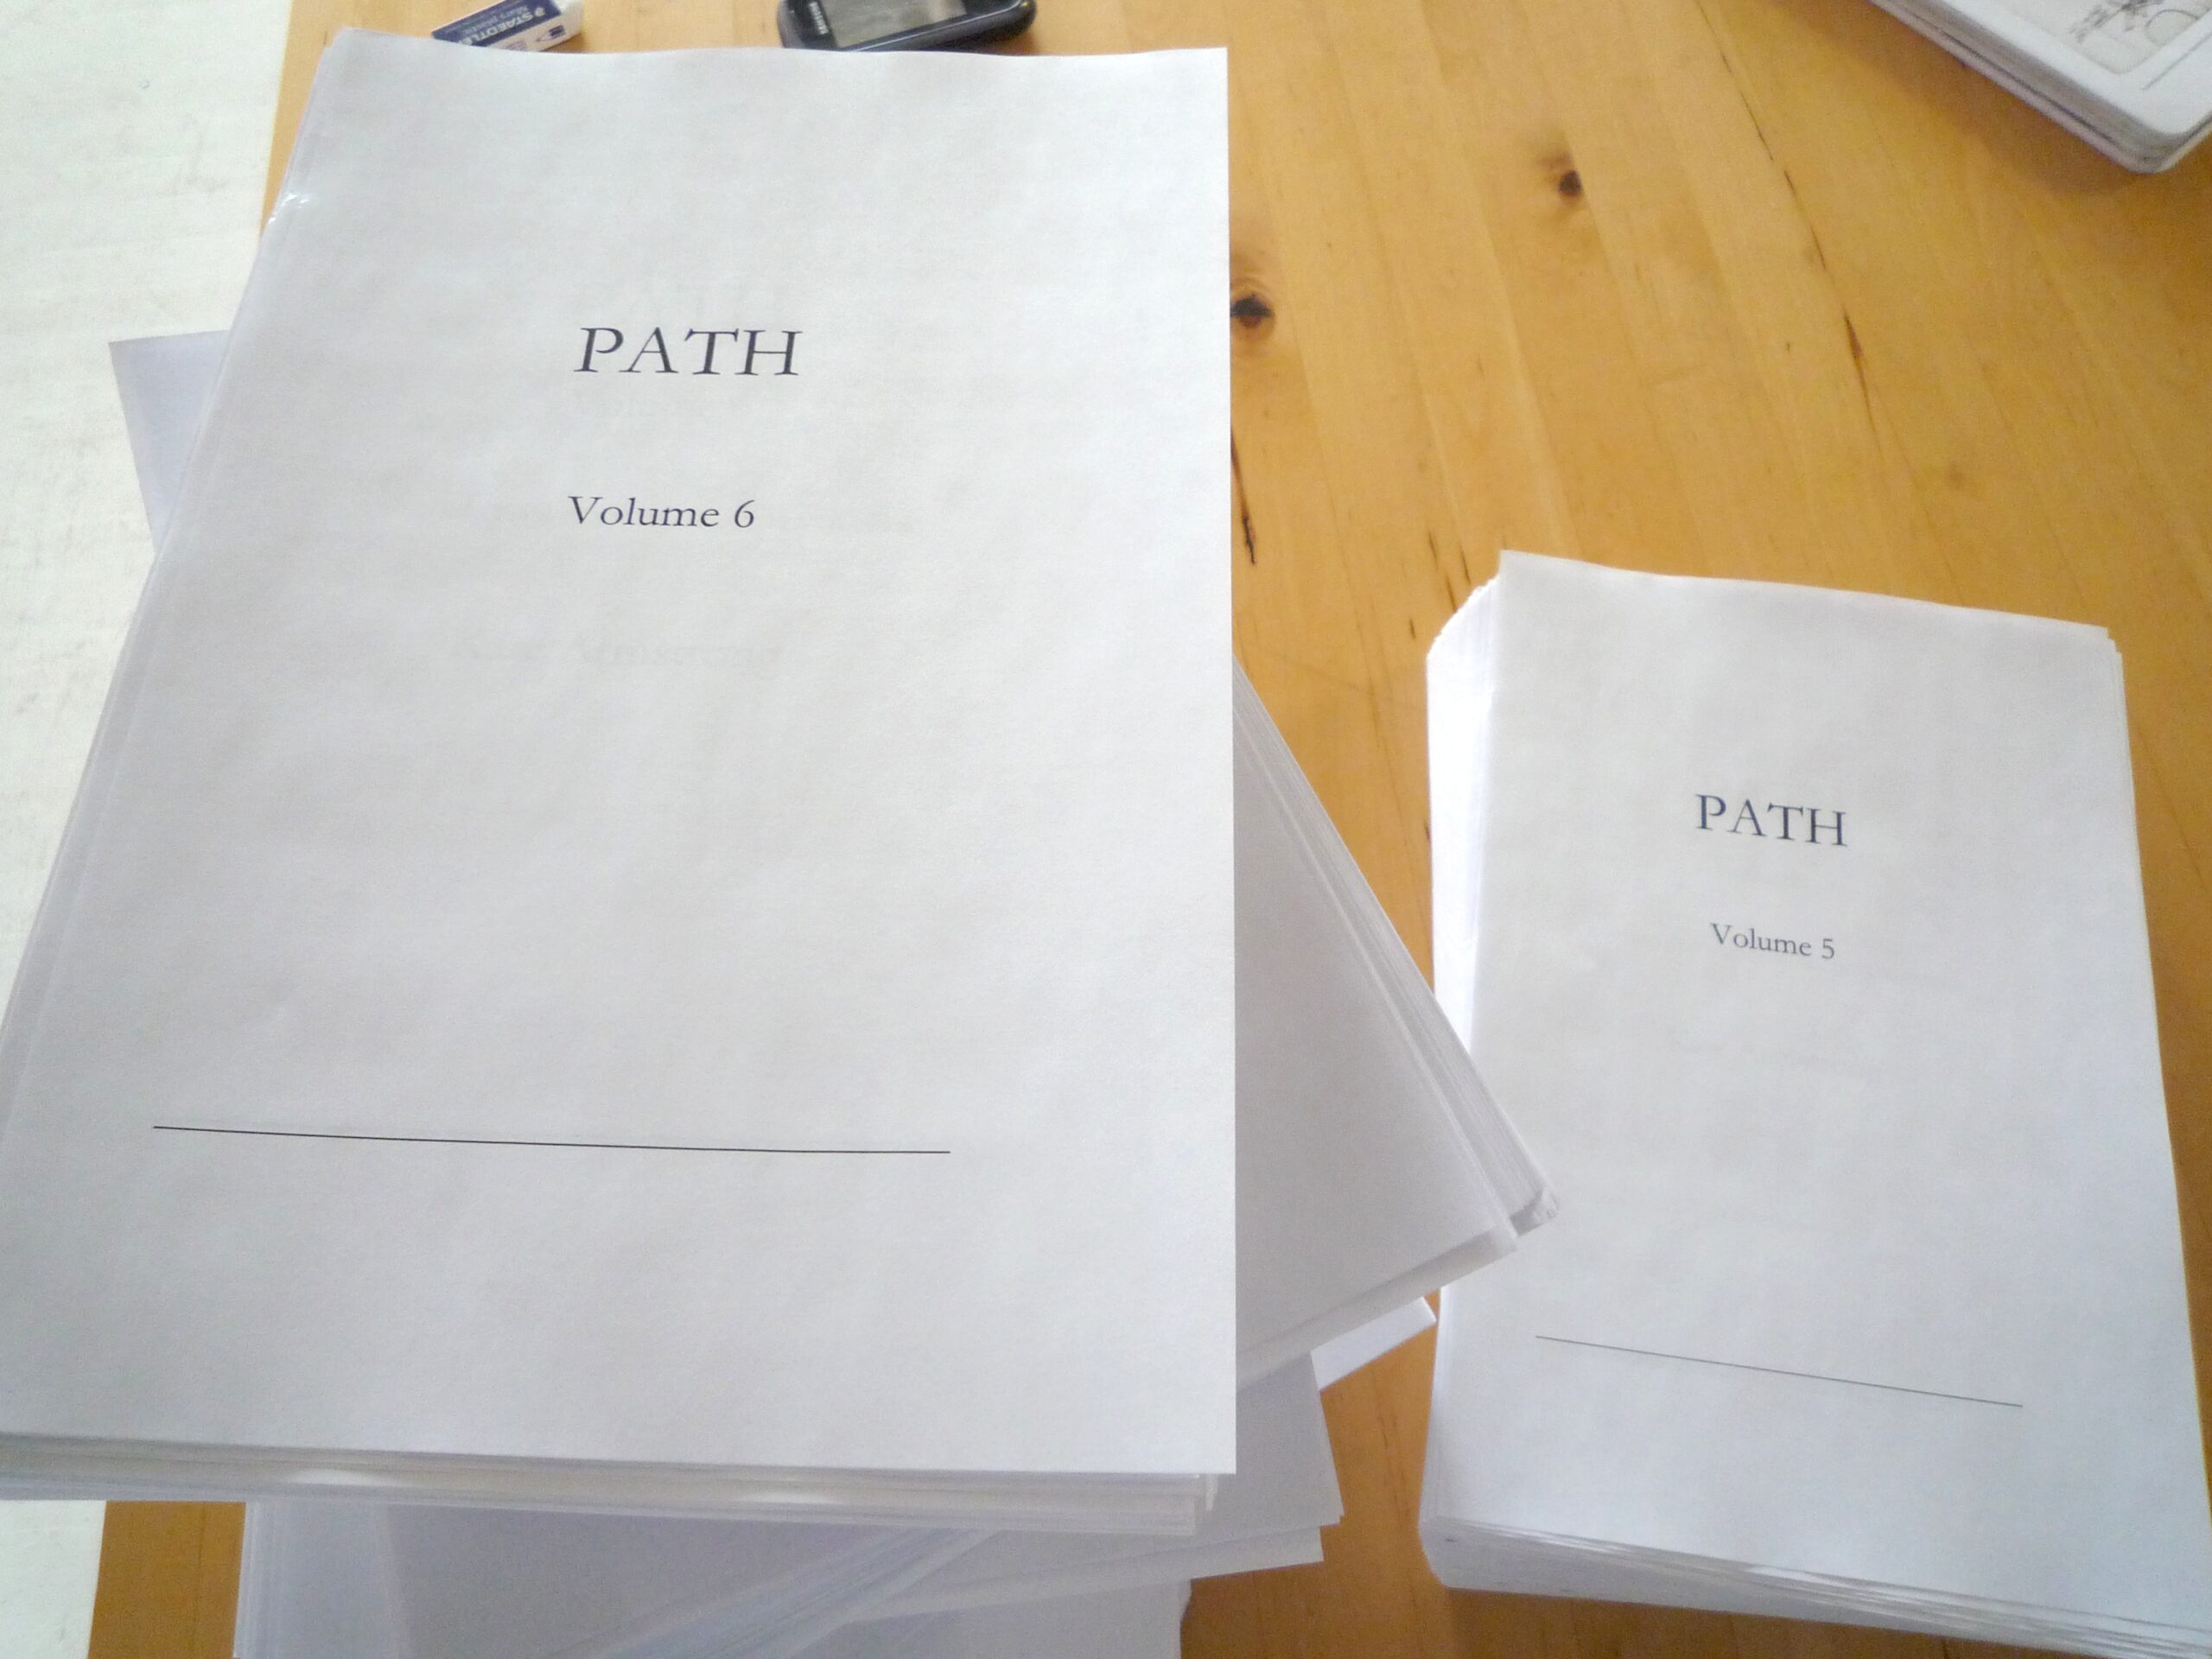 copies of Path waiting to be bound at Publication Studio Vancouver